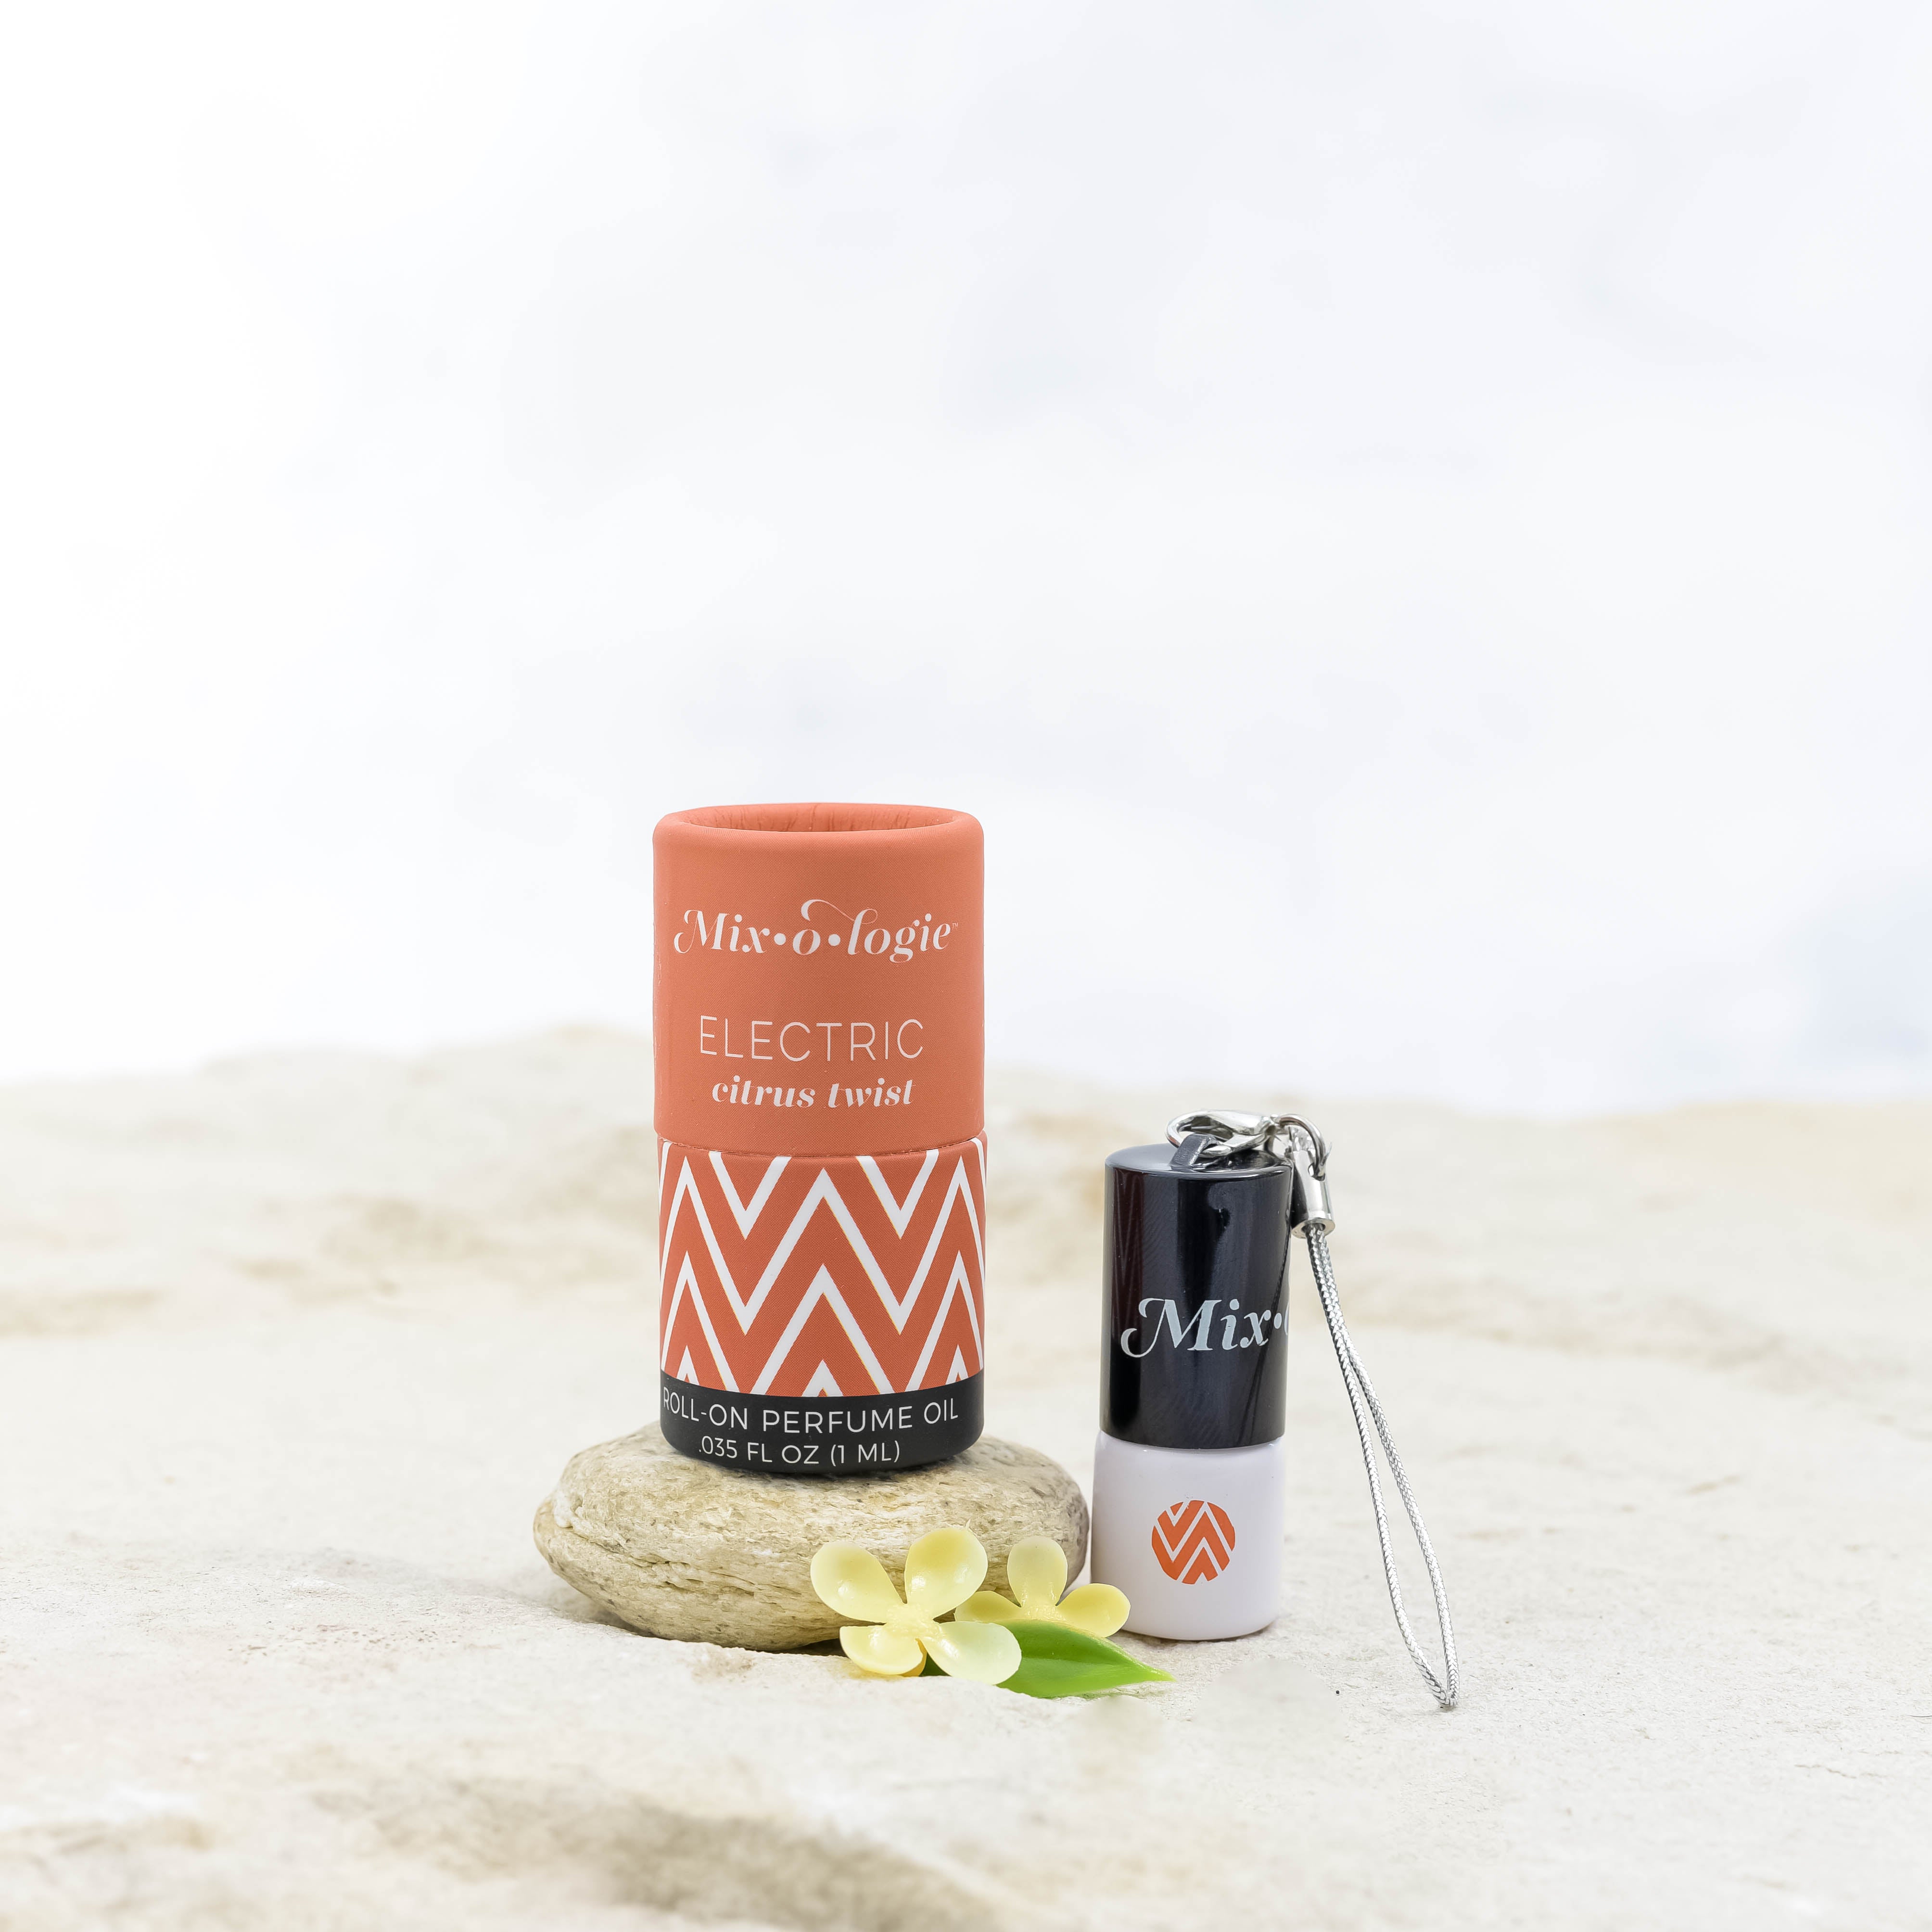 Electric (Citrus Twist) mini white cylinder rollerballs with black top and keychain attachment with orange chevron has .035 fl oz or 1 mL. Orange cylinder packing tube with orange chevron. Roll-on perfume oil. Mini rollerball and cylinder tube are in sand on a rock with yellow flowers.